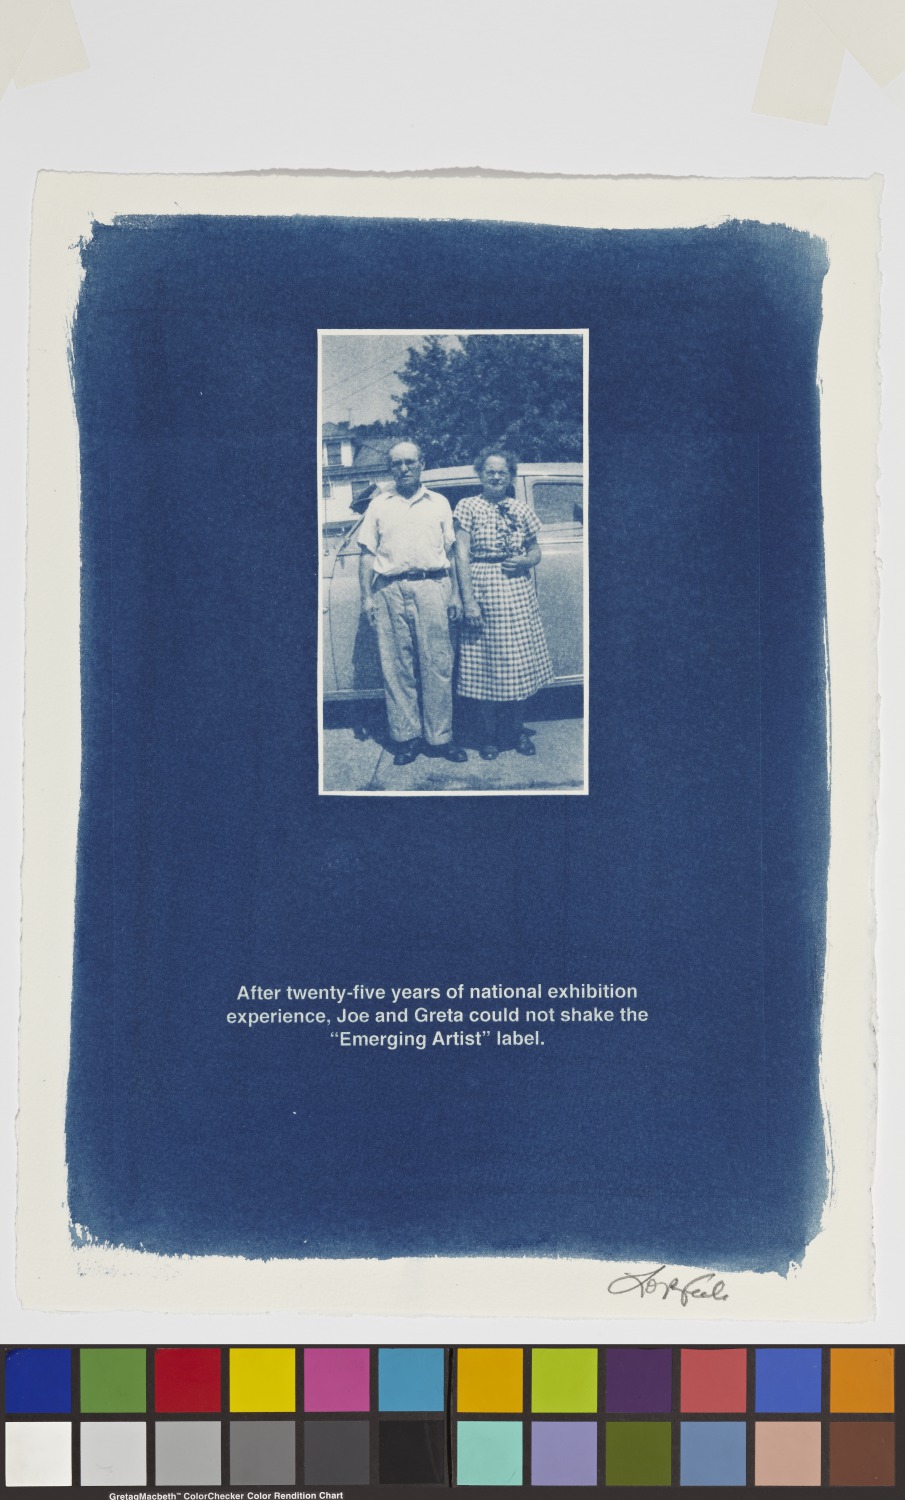 Annie Lopez, The Almost Real History of Art in Phoenix, 2007. Cyanotype. Museum purchase with funds provided by Eva and Eric Jungerman Family Endowment.